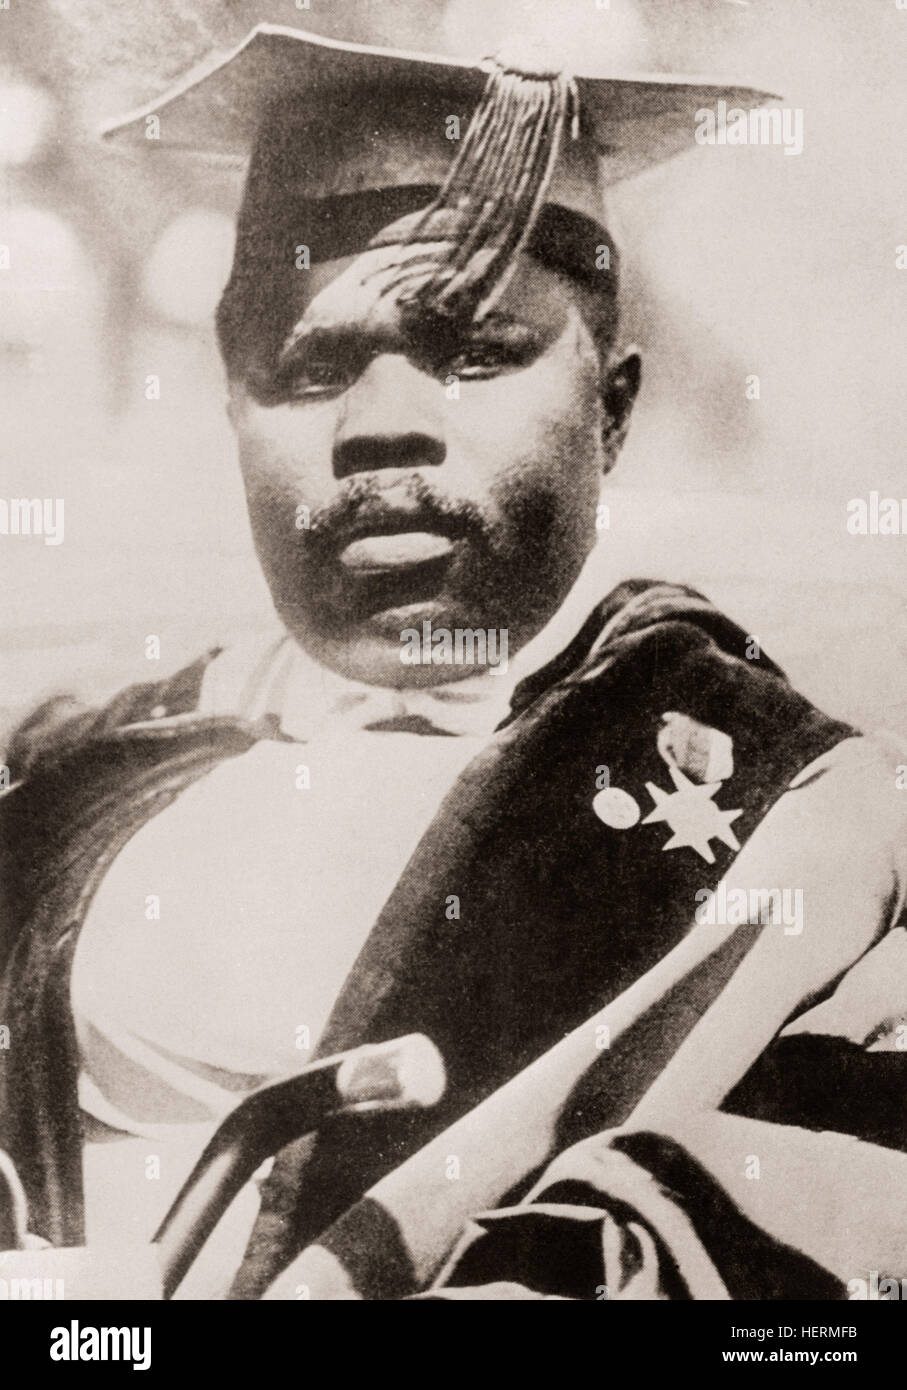 Marcus Mosiah Garvey, Jr., 1887 – 1940.  Jamaican political leader, publisher, journalist, entrepreneur, orator and a proponent of the Pan-Africanism movement. Founder of the Universal Negro Improvement Association and African Communities League (UNIA-ACL). Stock Photo